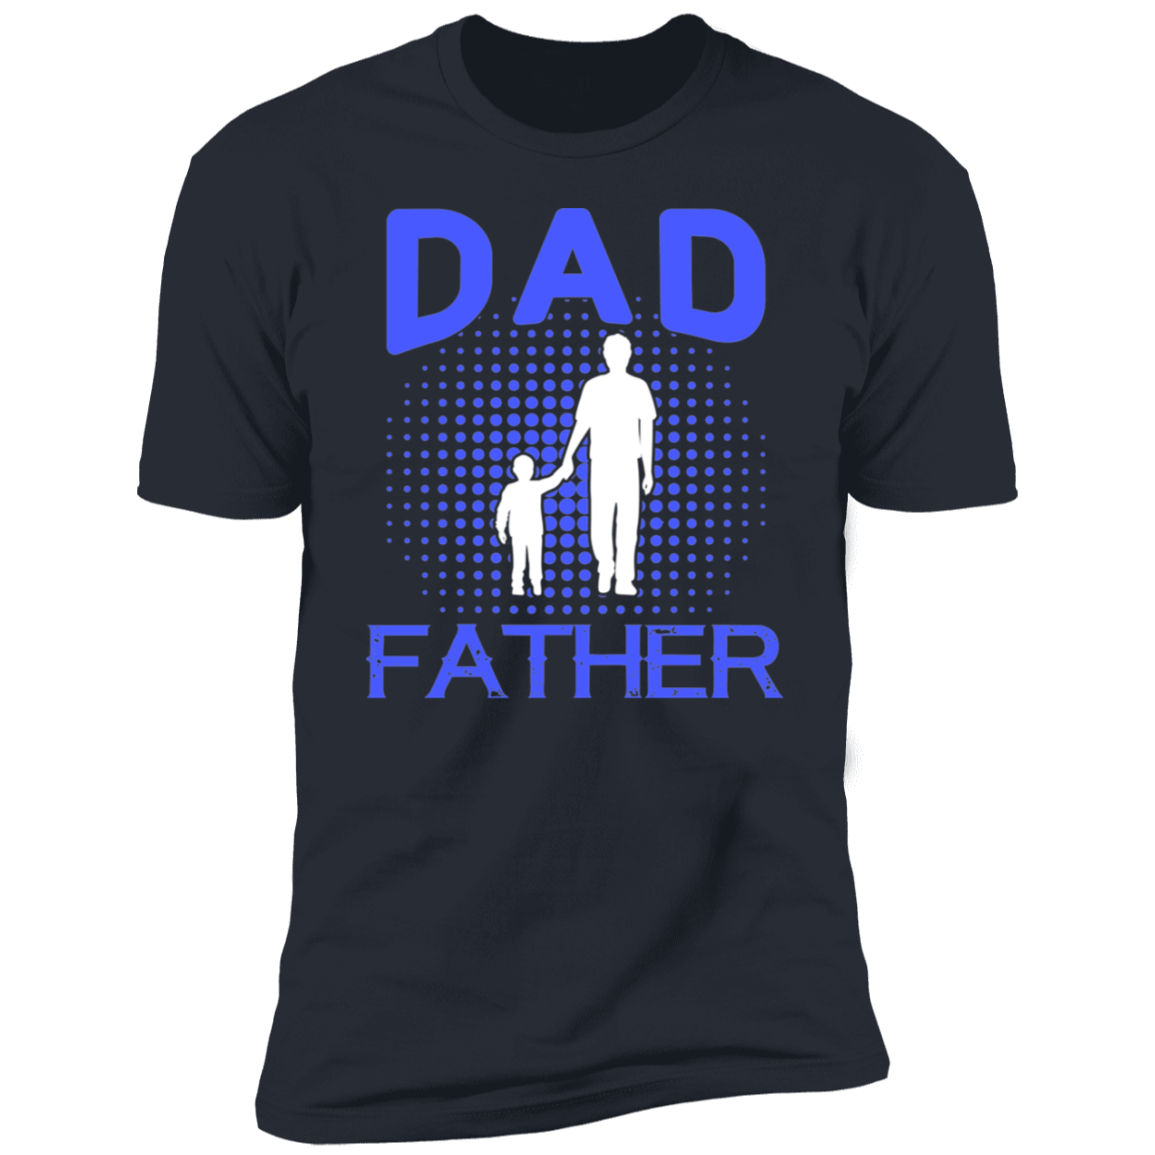 DAD FATHER Short Sleeve T-Shirt